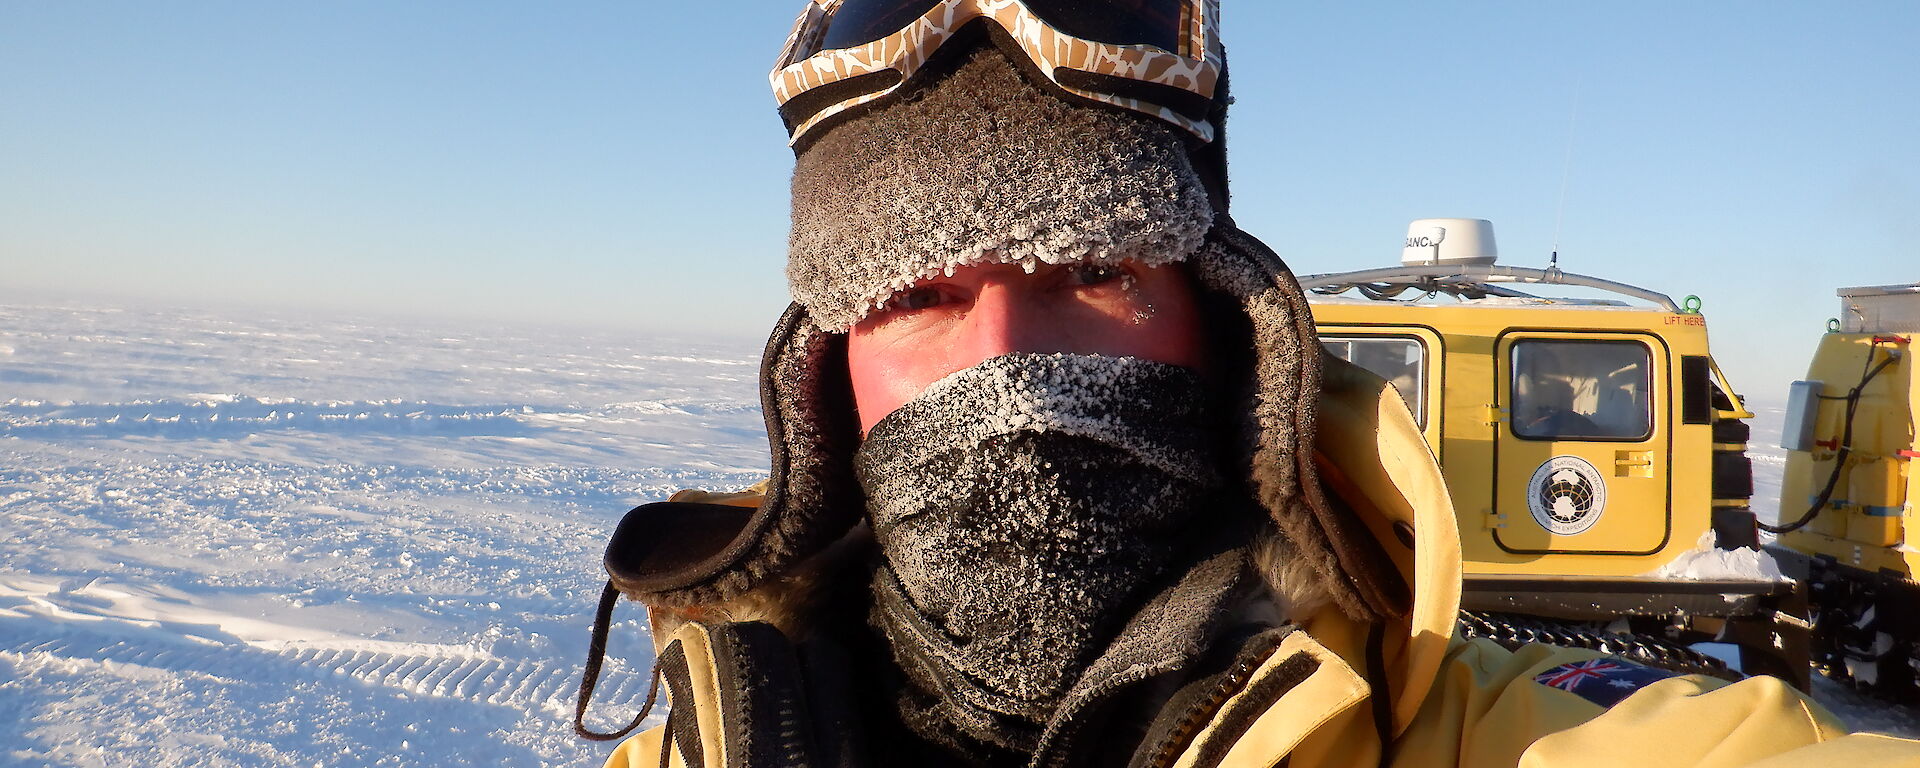 Portrait of expeditioner with cold weather gear.  Only eyes are uncovered on his face.  Ice in background.